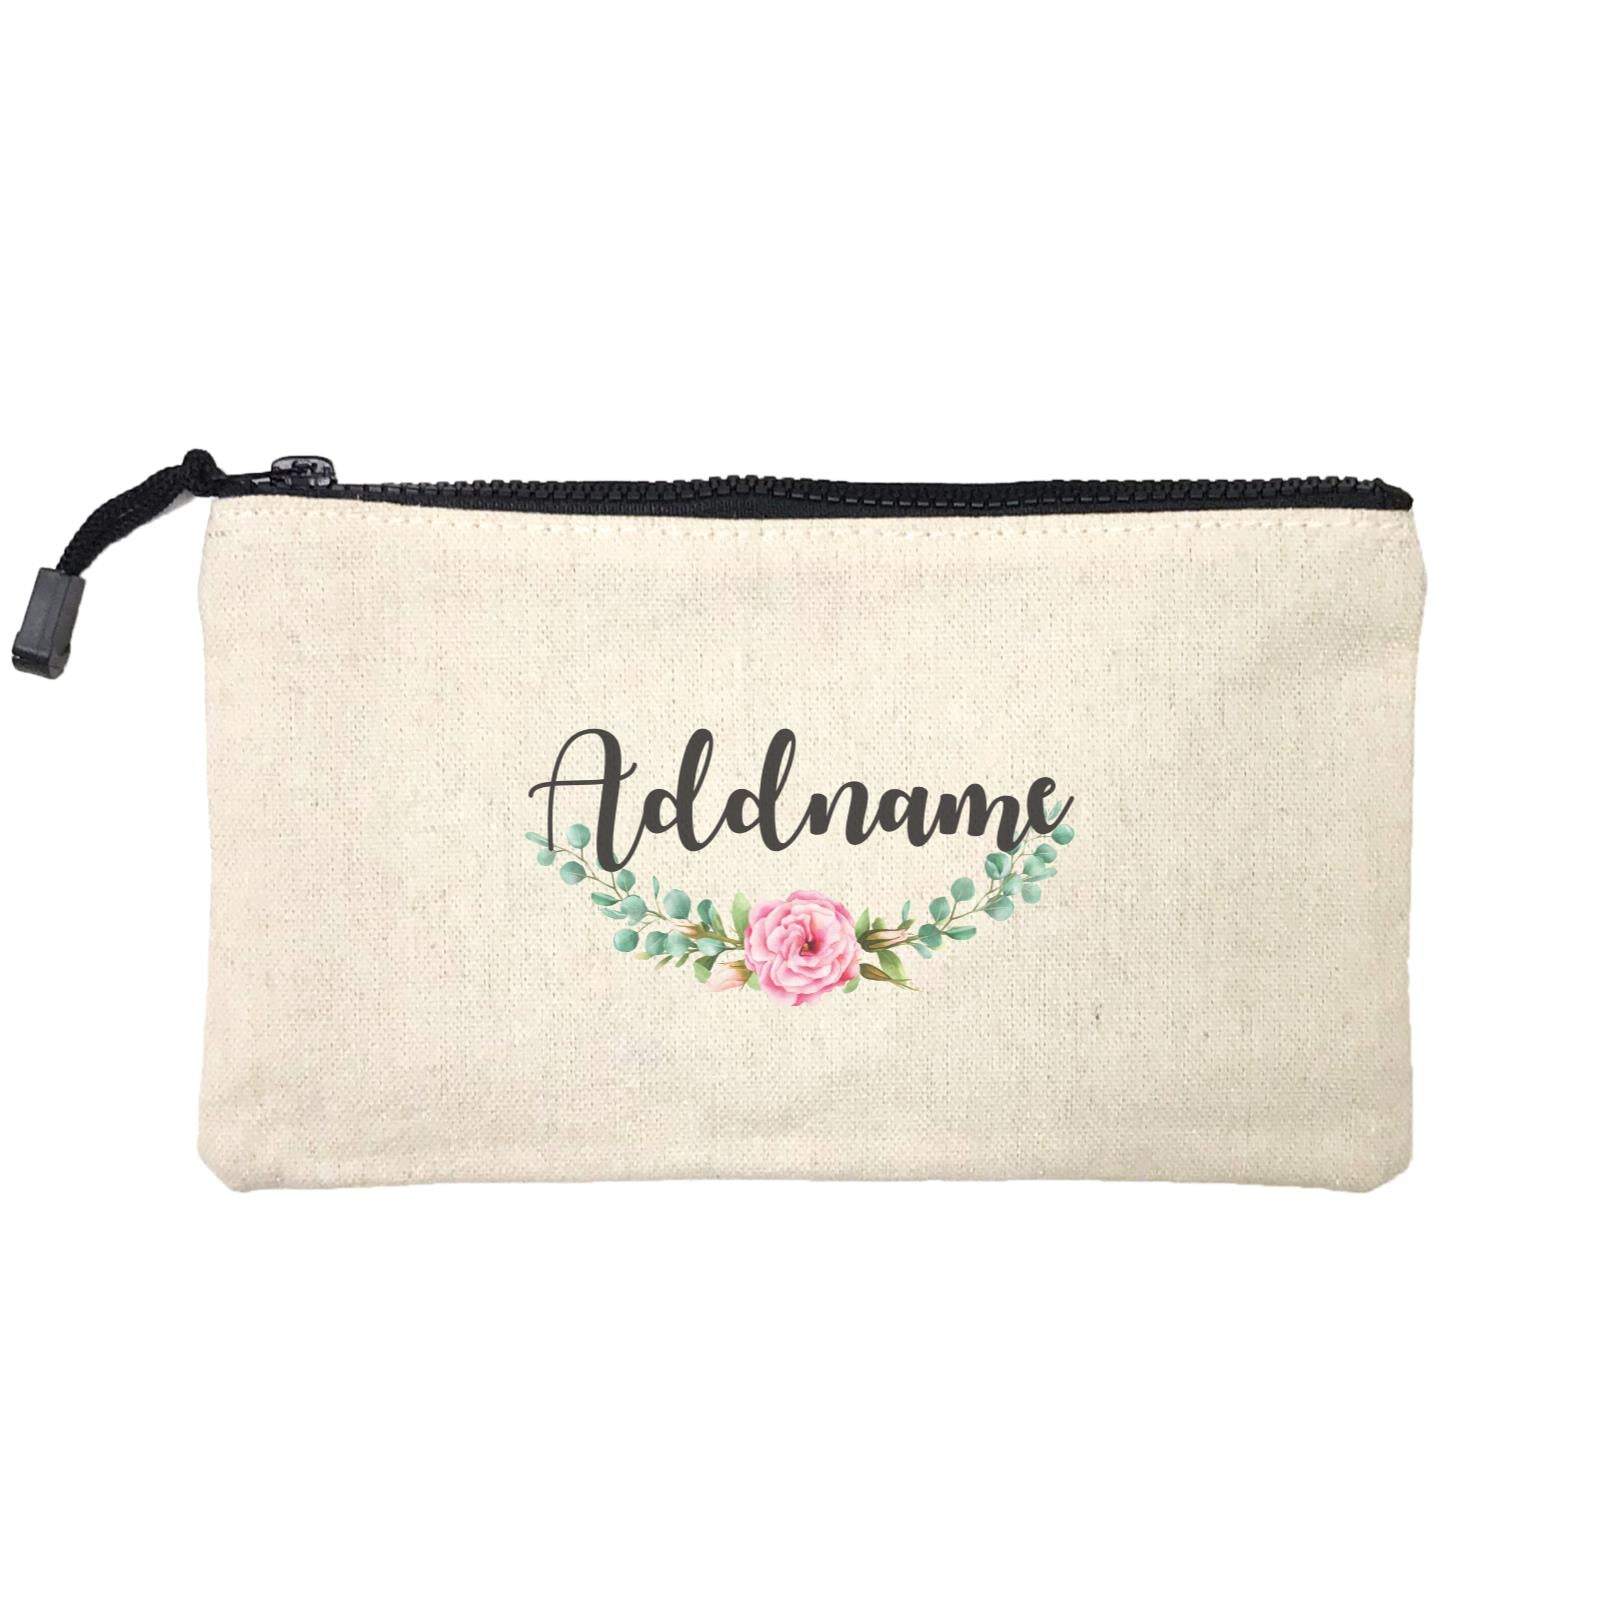 Bridesmaid Floral Modern Pink Flowers Addname Mini Accessories Stationery Pouch